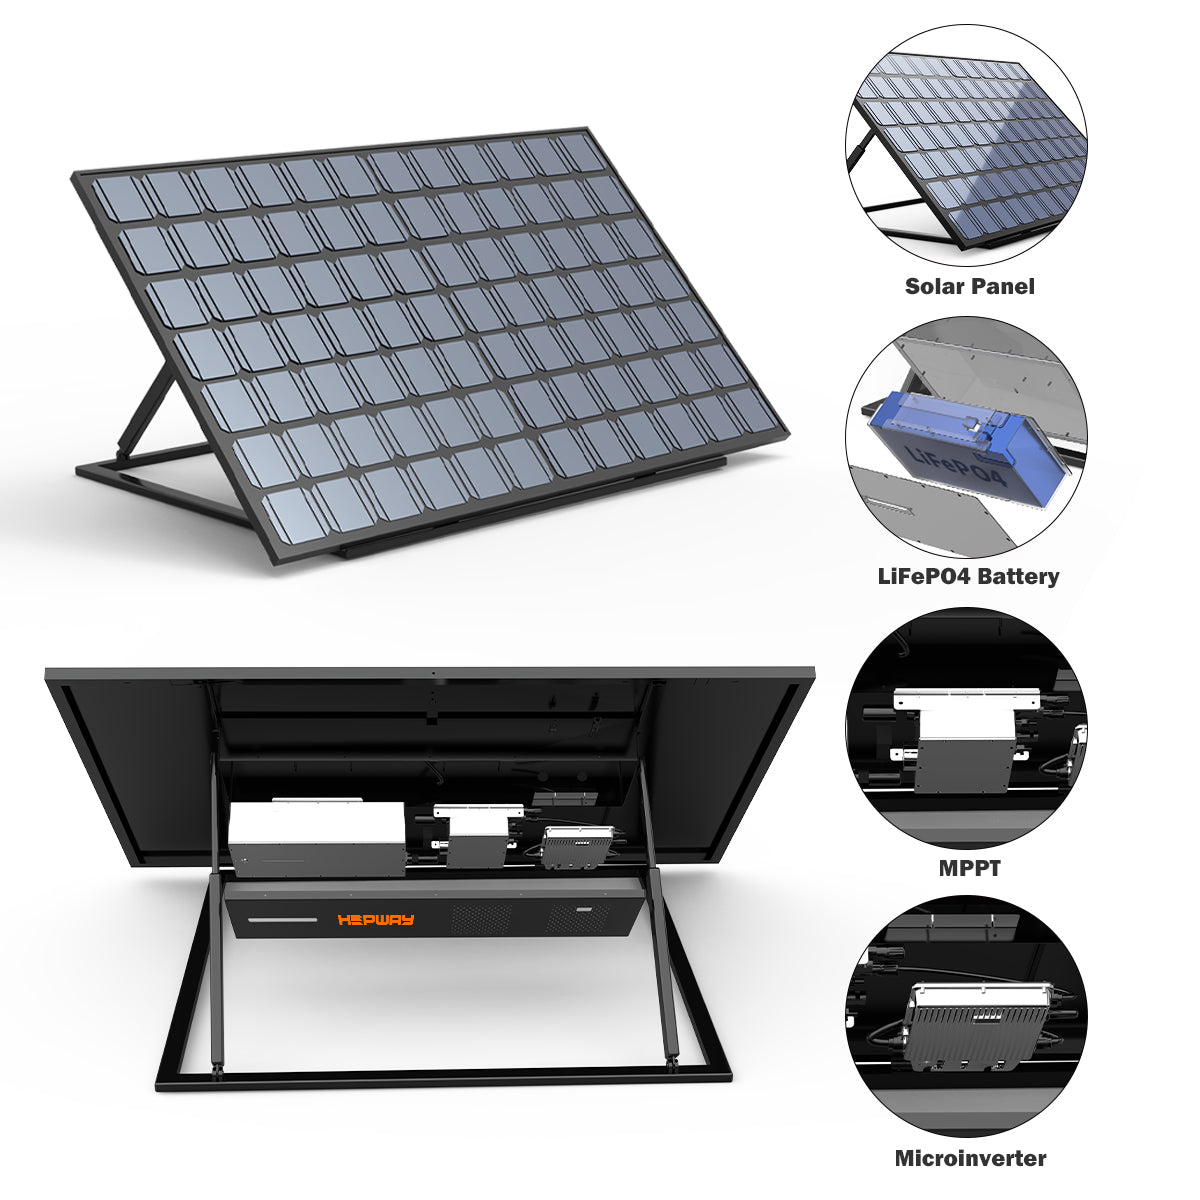 HEPWAY BPIS-700 All-in-one Solar Storage System = Solar Panel 400W+ Battery 700Wh + Microinverter 400W